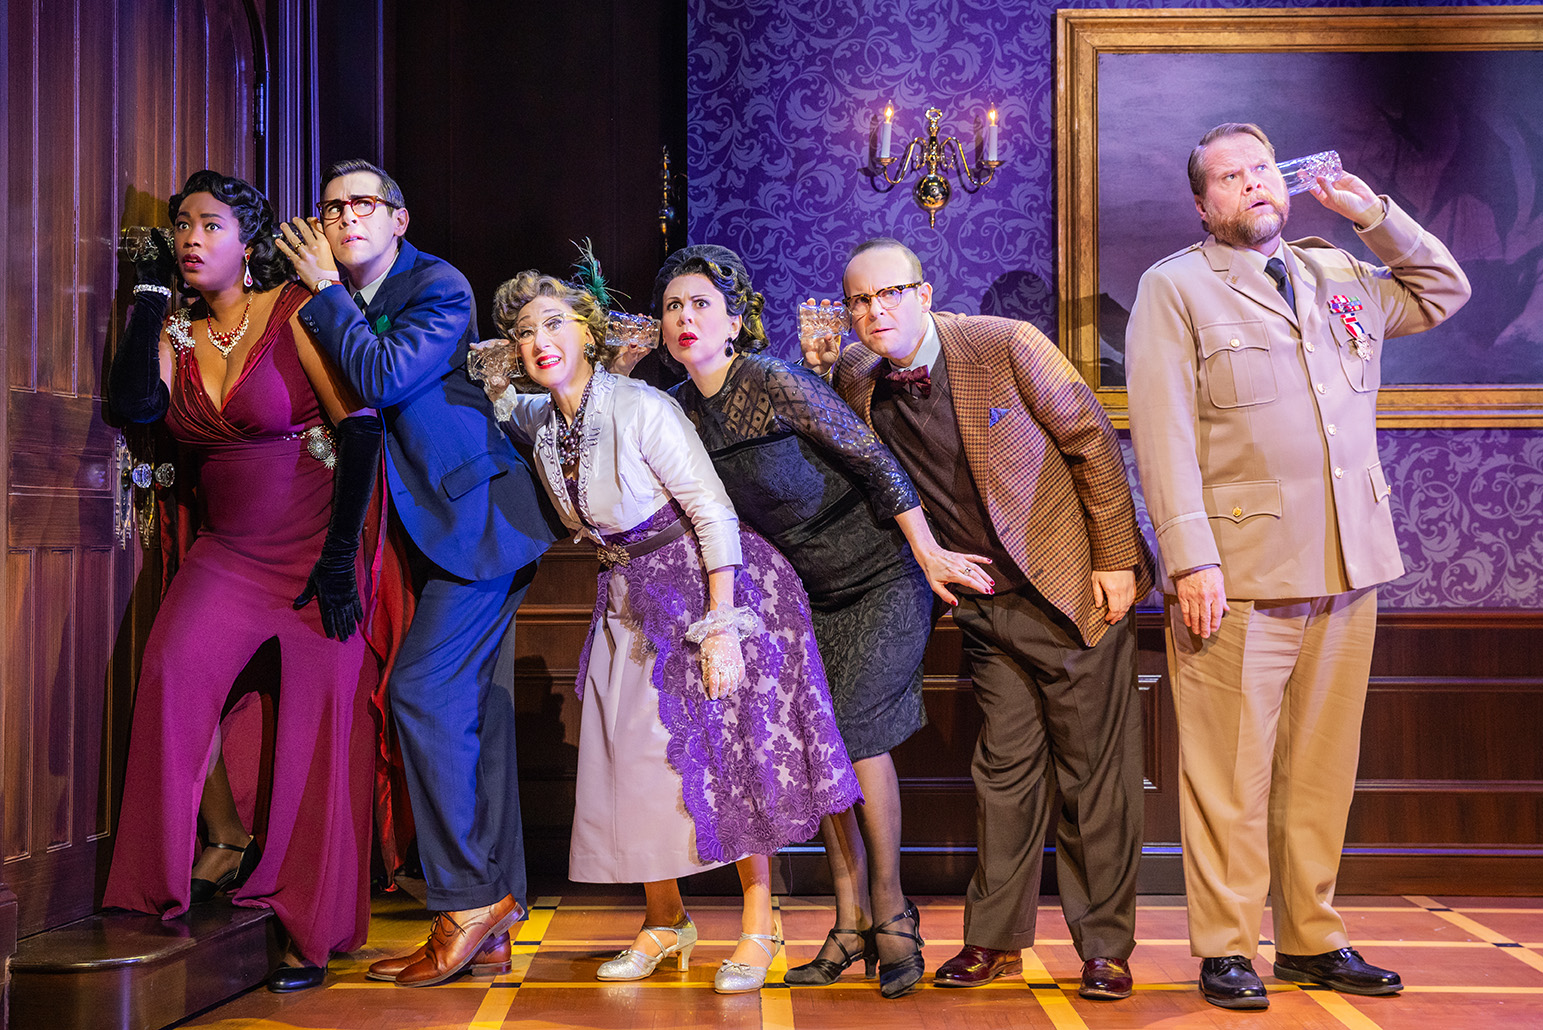 Left (top to bottom): Sarah Hollis as Miss Scarlet, John Treacy Egan as Colonel Mustard, Kathy Fitzgerald as Mrs. Peacock, Donna English as Mrs. White, Isabelle McCalla as Yvette, Michael Kostroff as Professor Plum, Alex Mandell as Mr. Green; right: Mark Price as Wadsworth. Courtesy of Paper Mill Playhouse; photo by Evan Zimmerman/MurphyMade